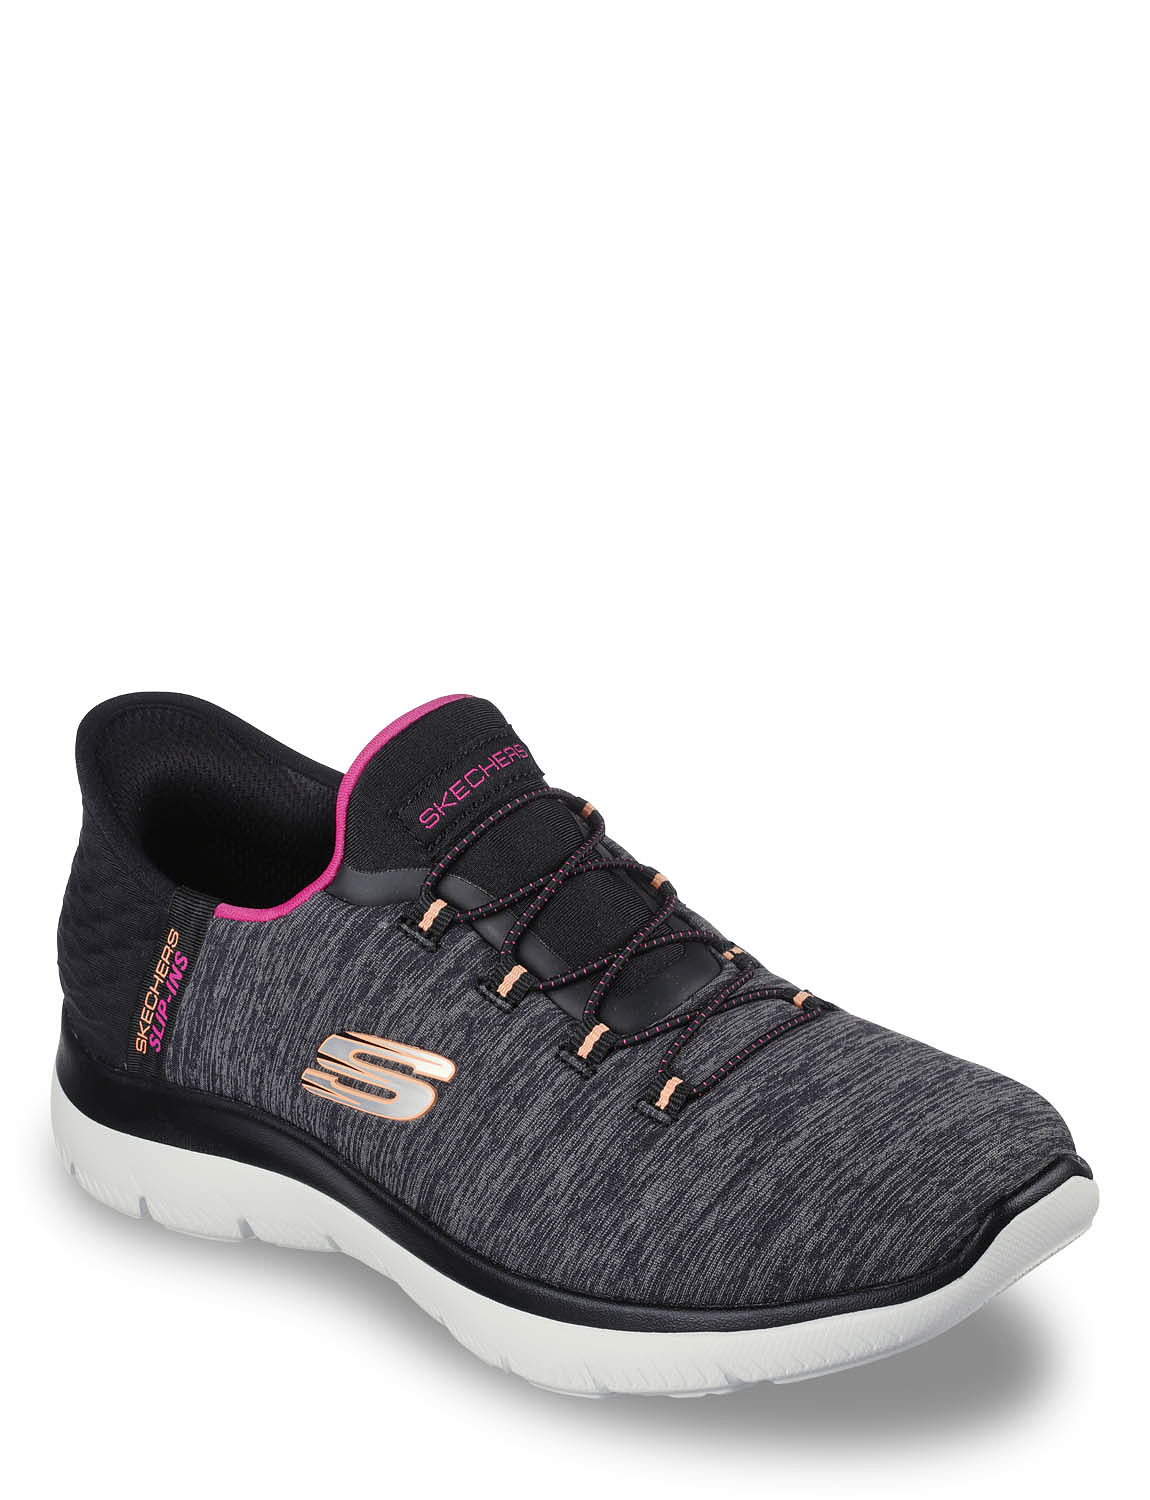 Skechers Wide Fit Bungee Slip In Shoes | Chums